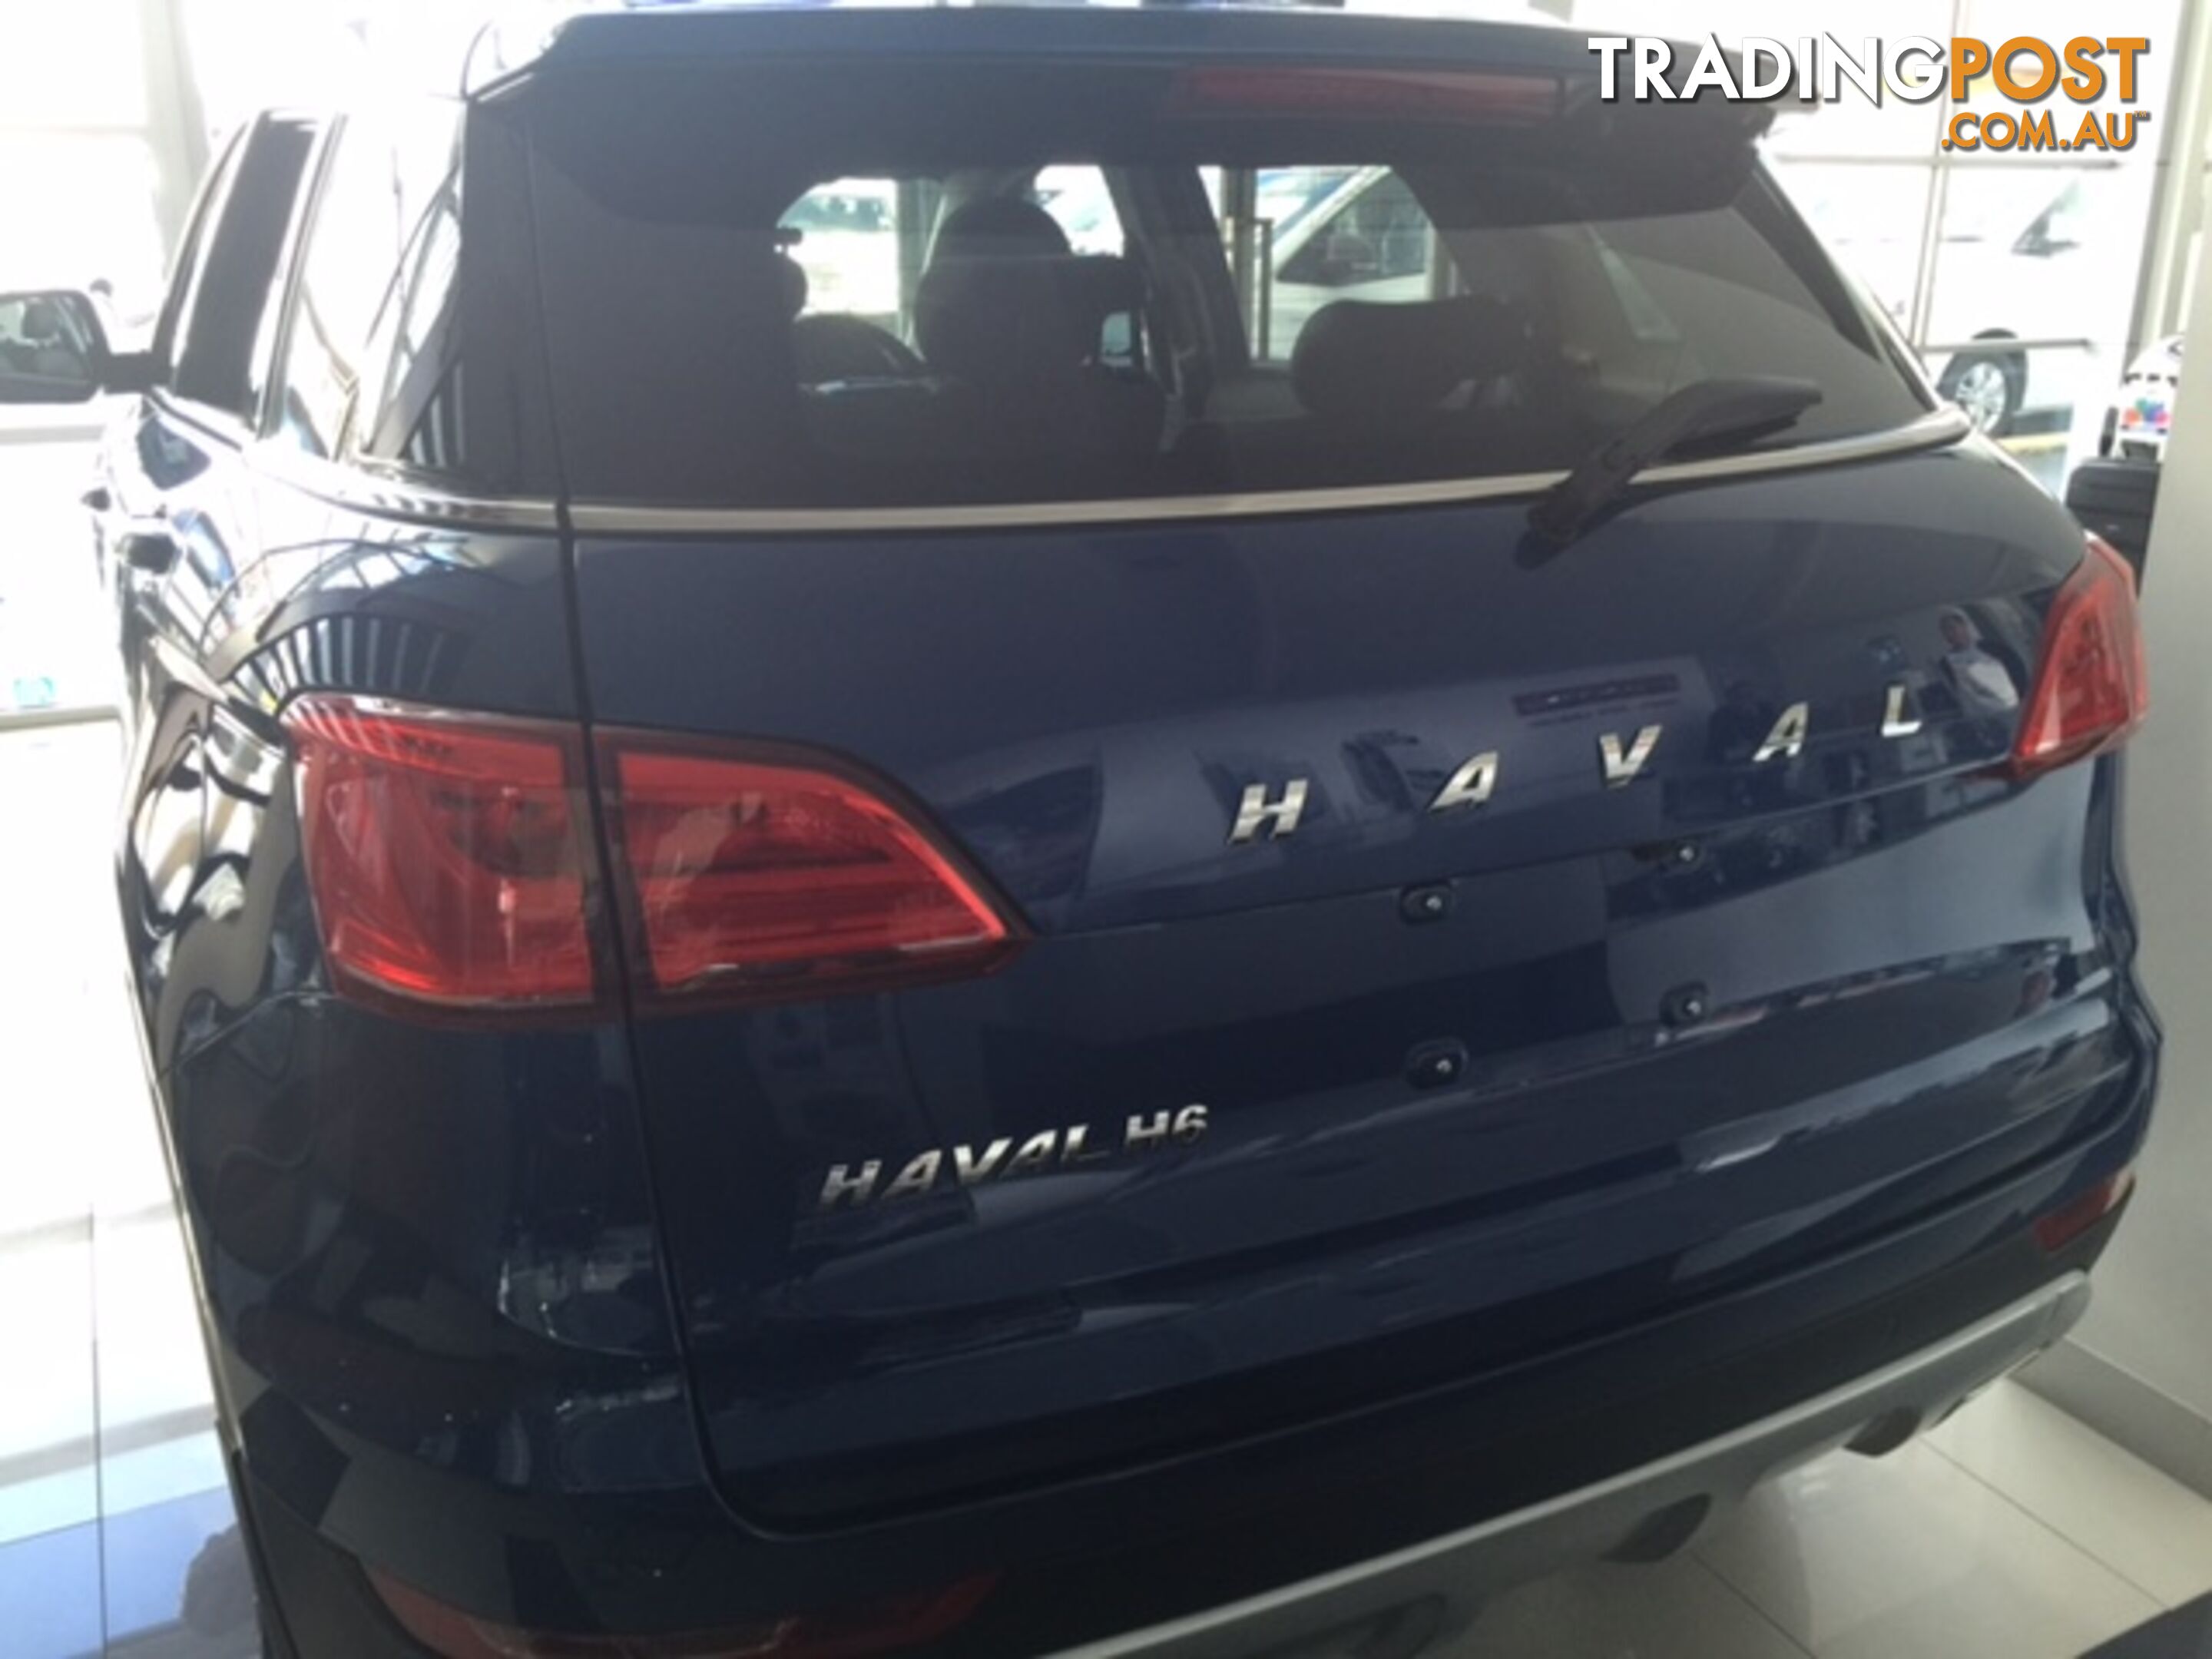 2016 HAVAL H6 LUX MKY 4D WAGON